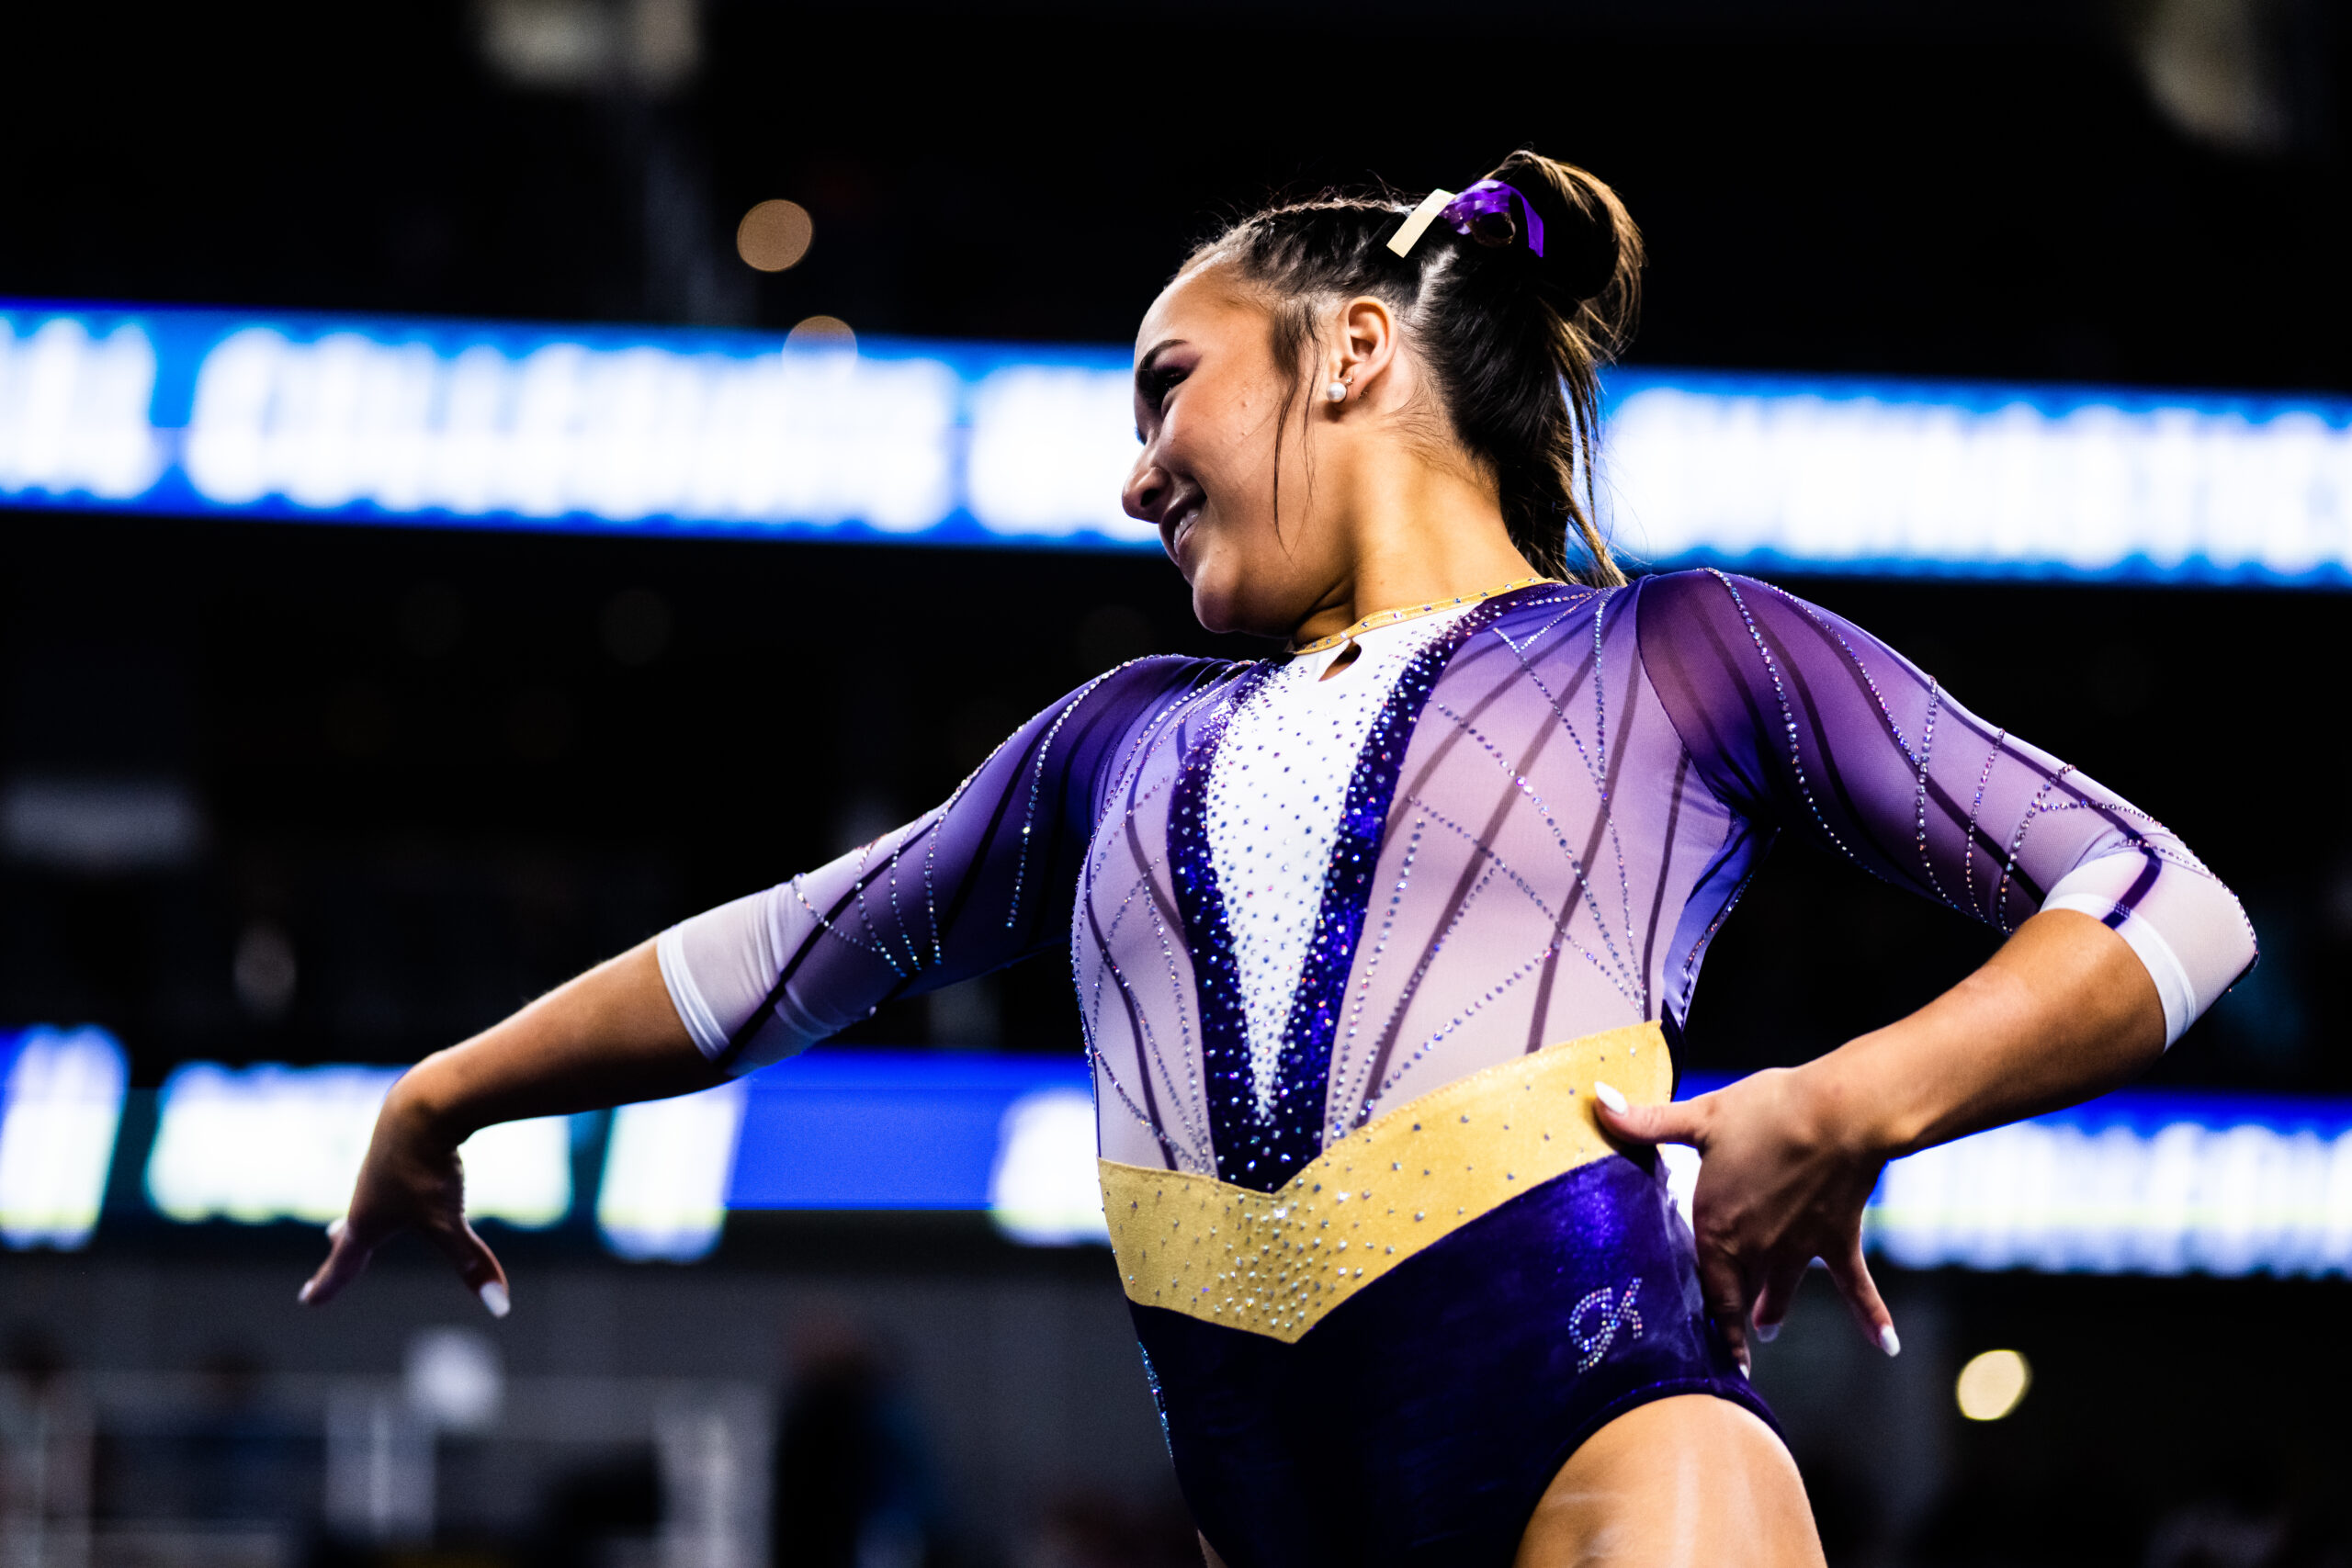 2023 NCAA Women's Gymnastics Championship: Preview and stars to watch